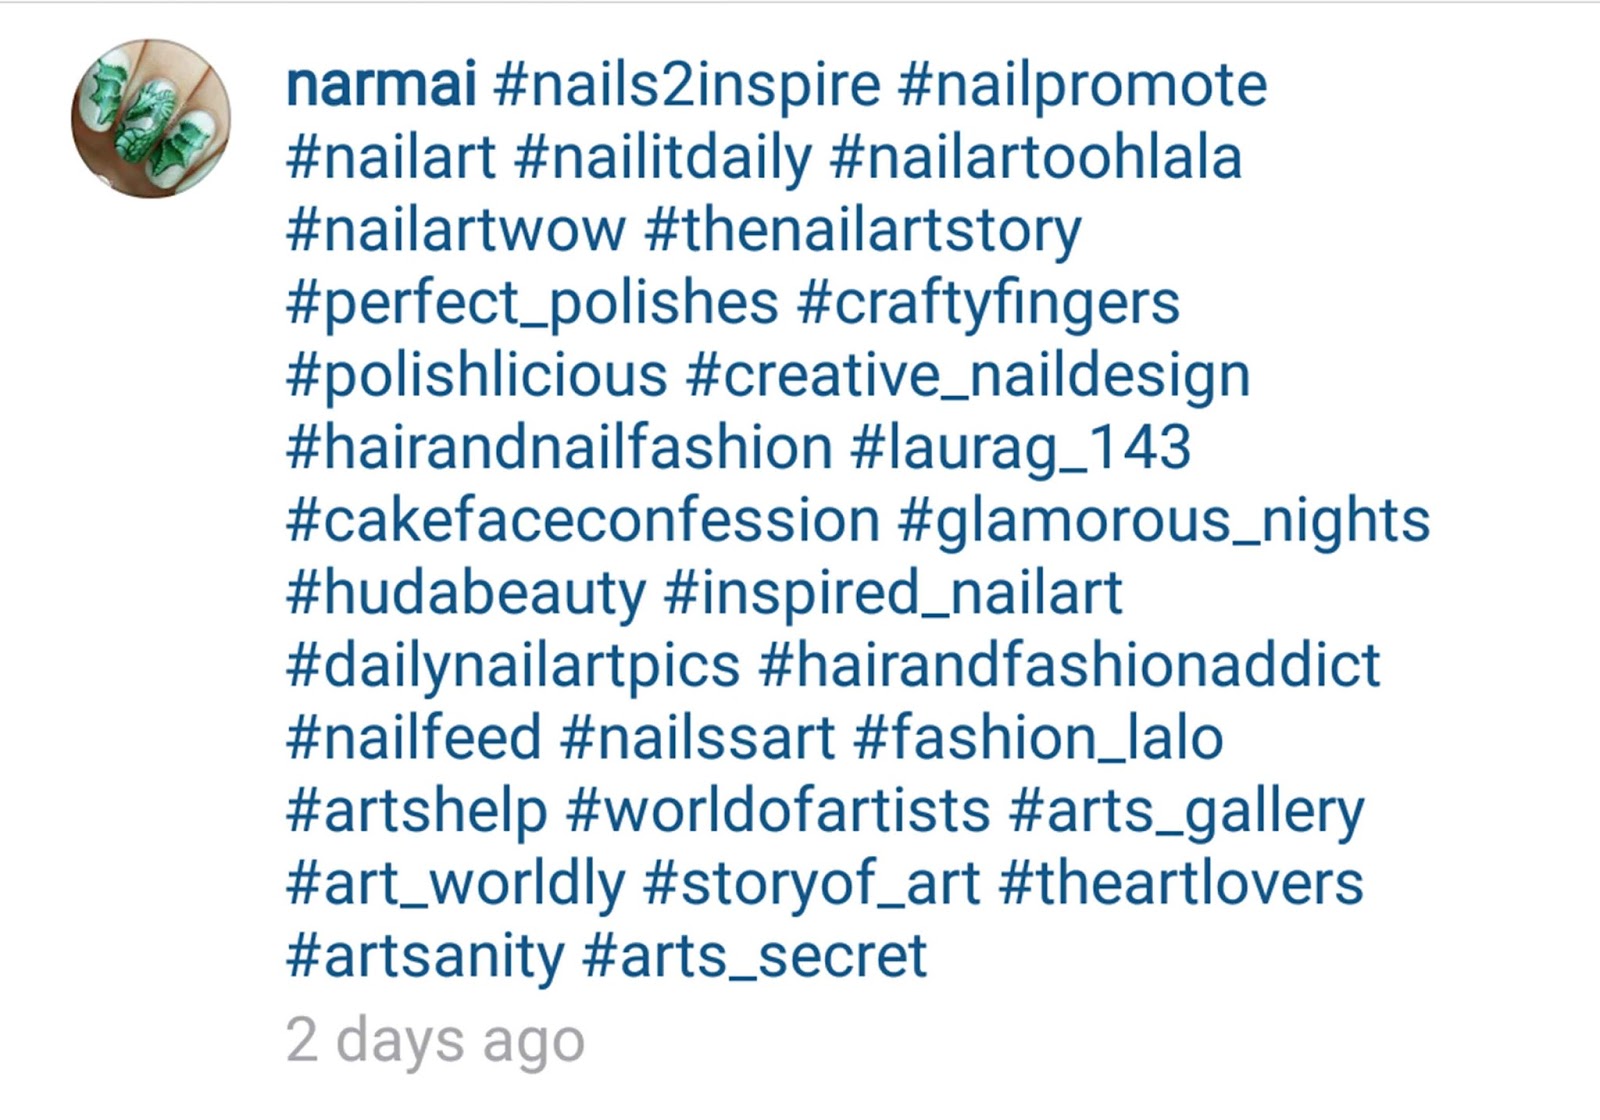 10. Toe Nail Design Hashtags on Instagram - wide 2